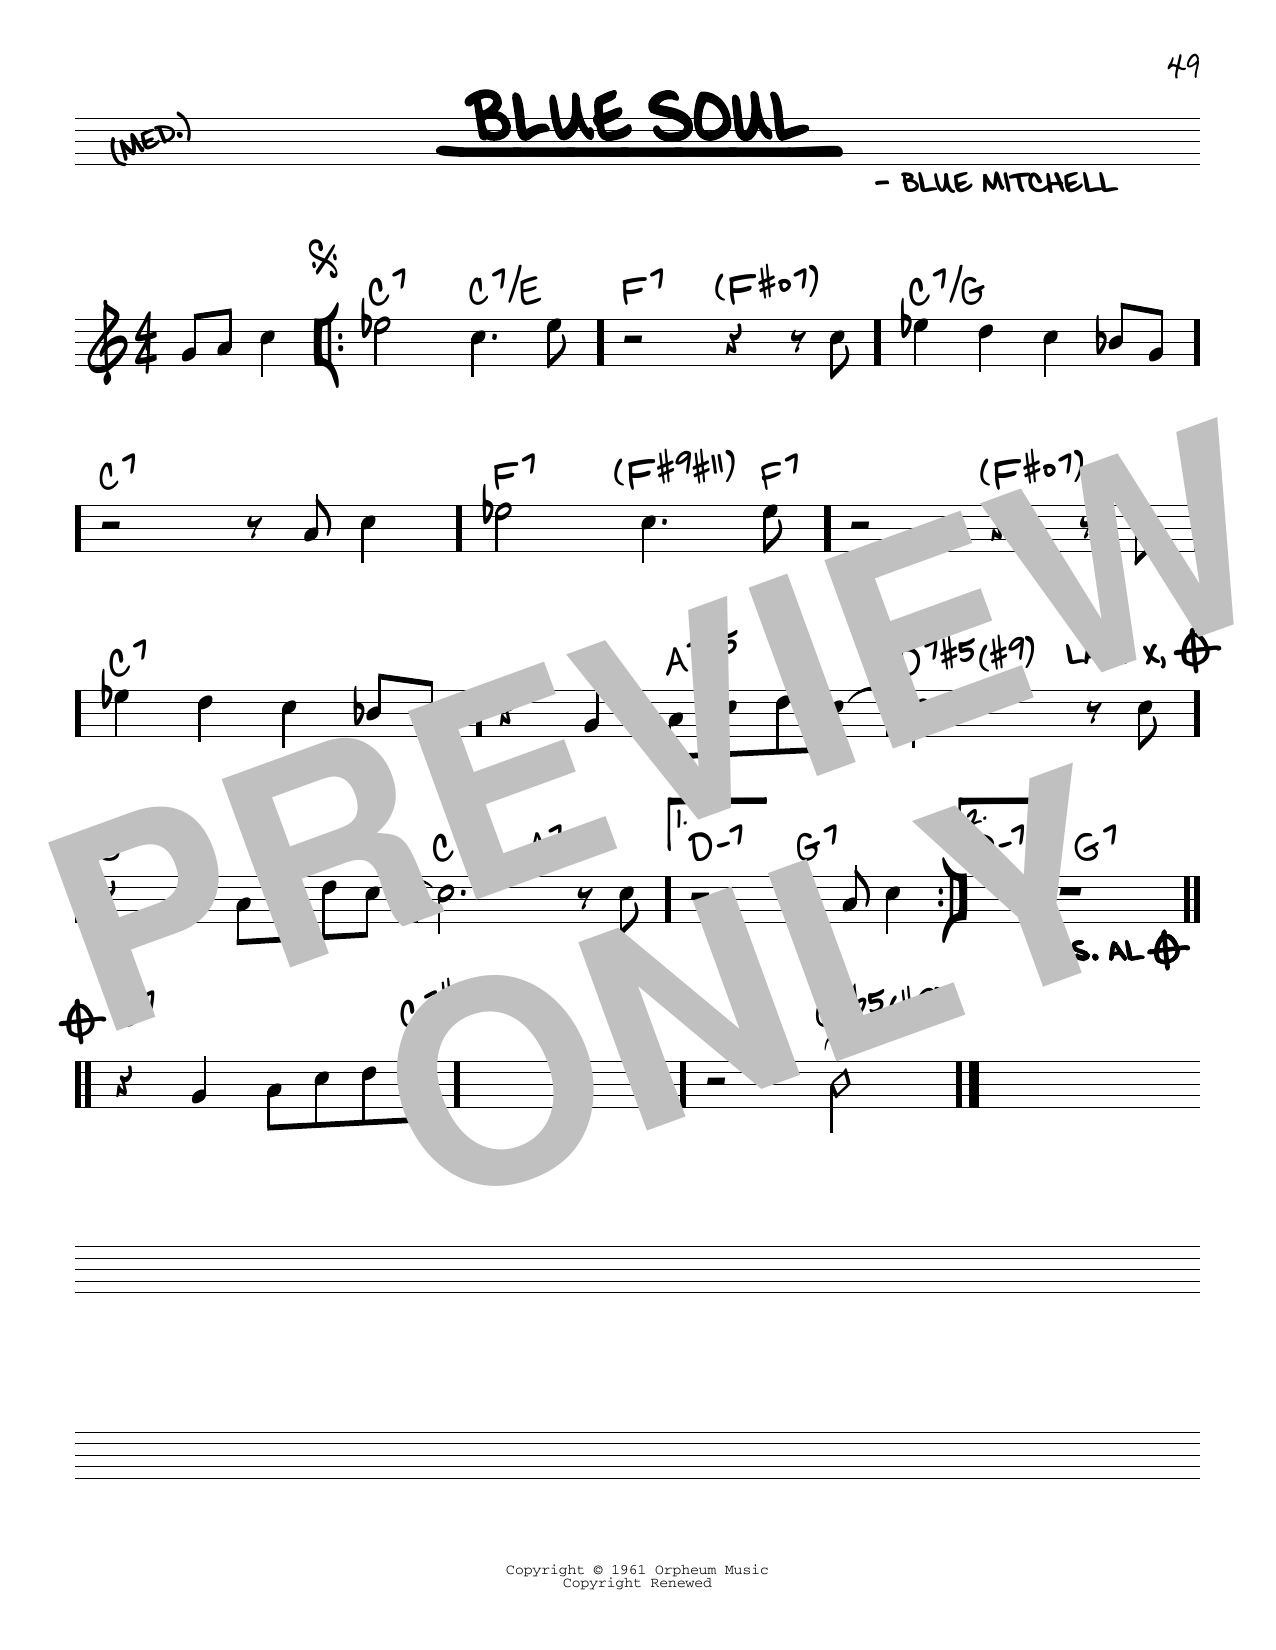 Download Blue Mitchell Blue Soul sheet music and printable PDF score & Jazz music notes